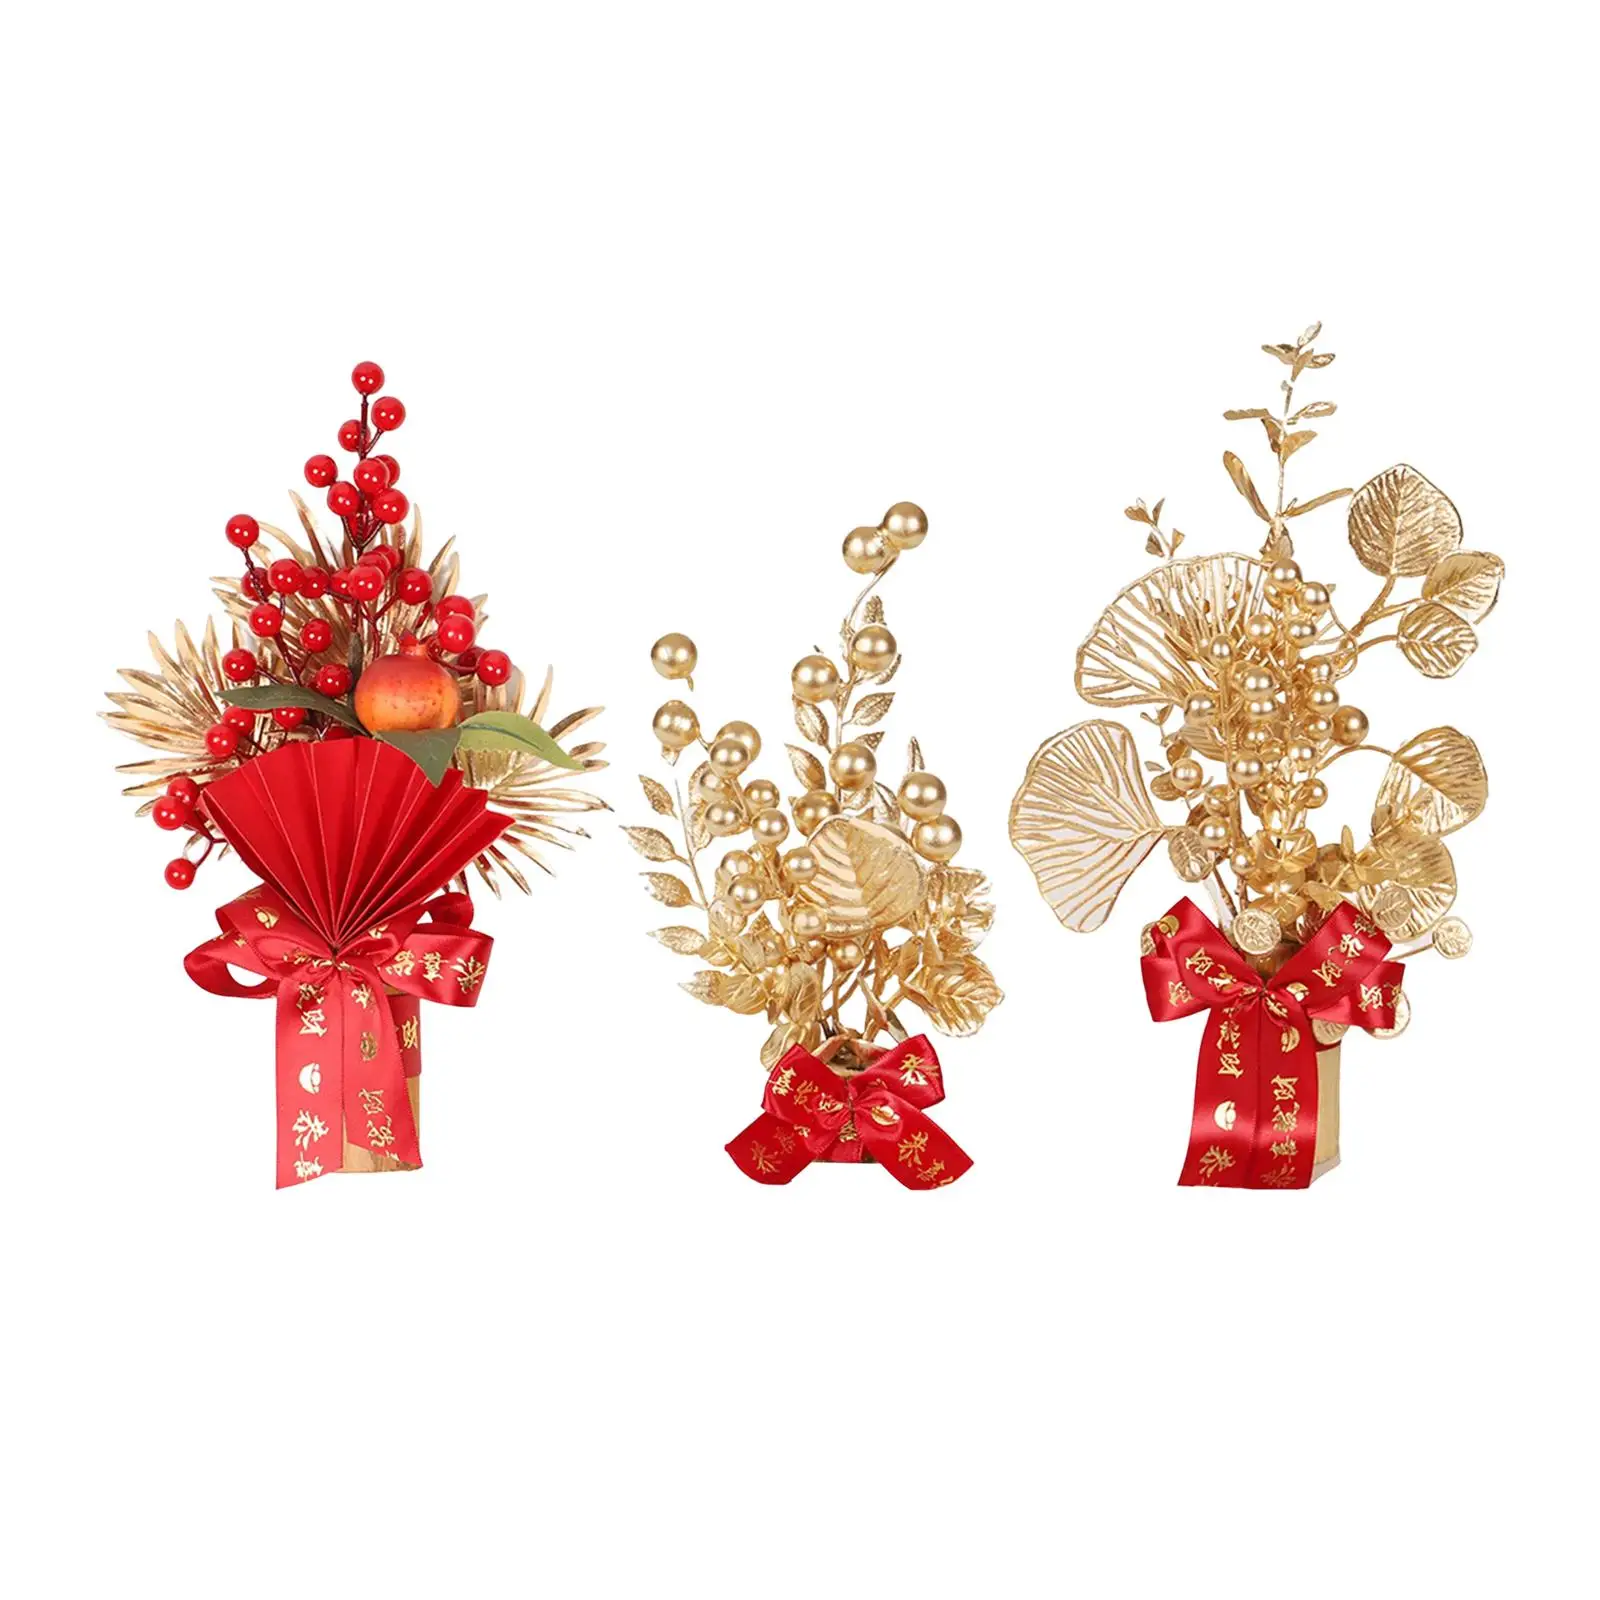 Chinese New Year Decoration Money Tree Ornament Art Crafts Decorative for Shop Table Centerpiece Living Room Party Wedding